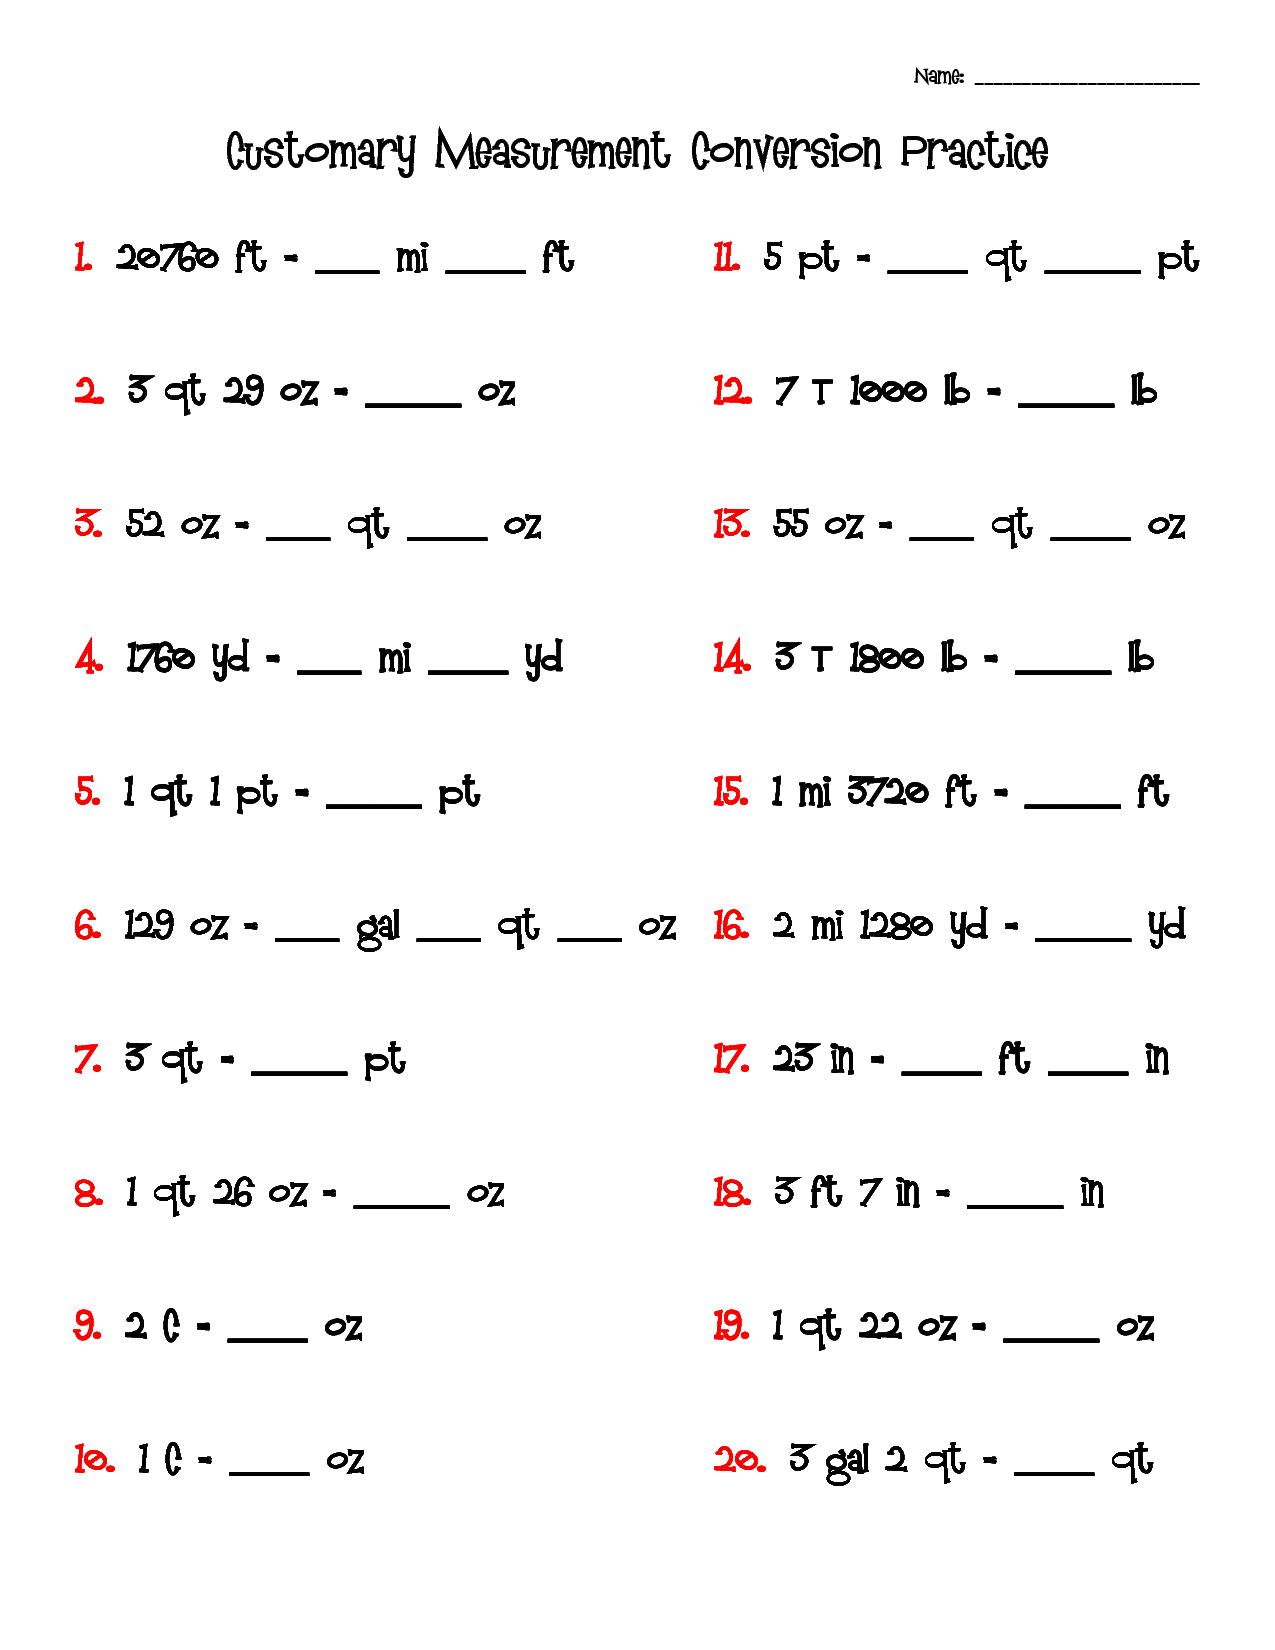 13-best-images-of-yards-to-inches-worksheets-customary-unit